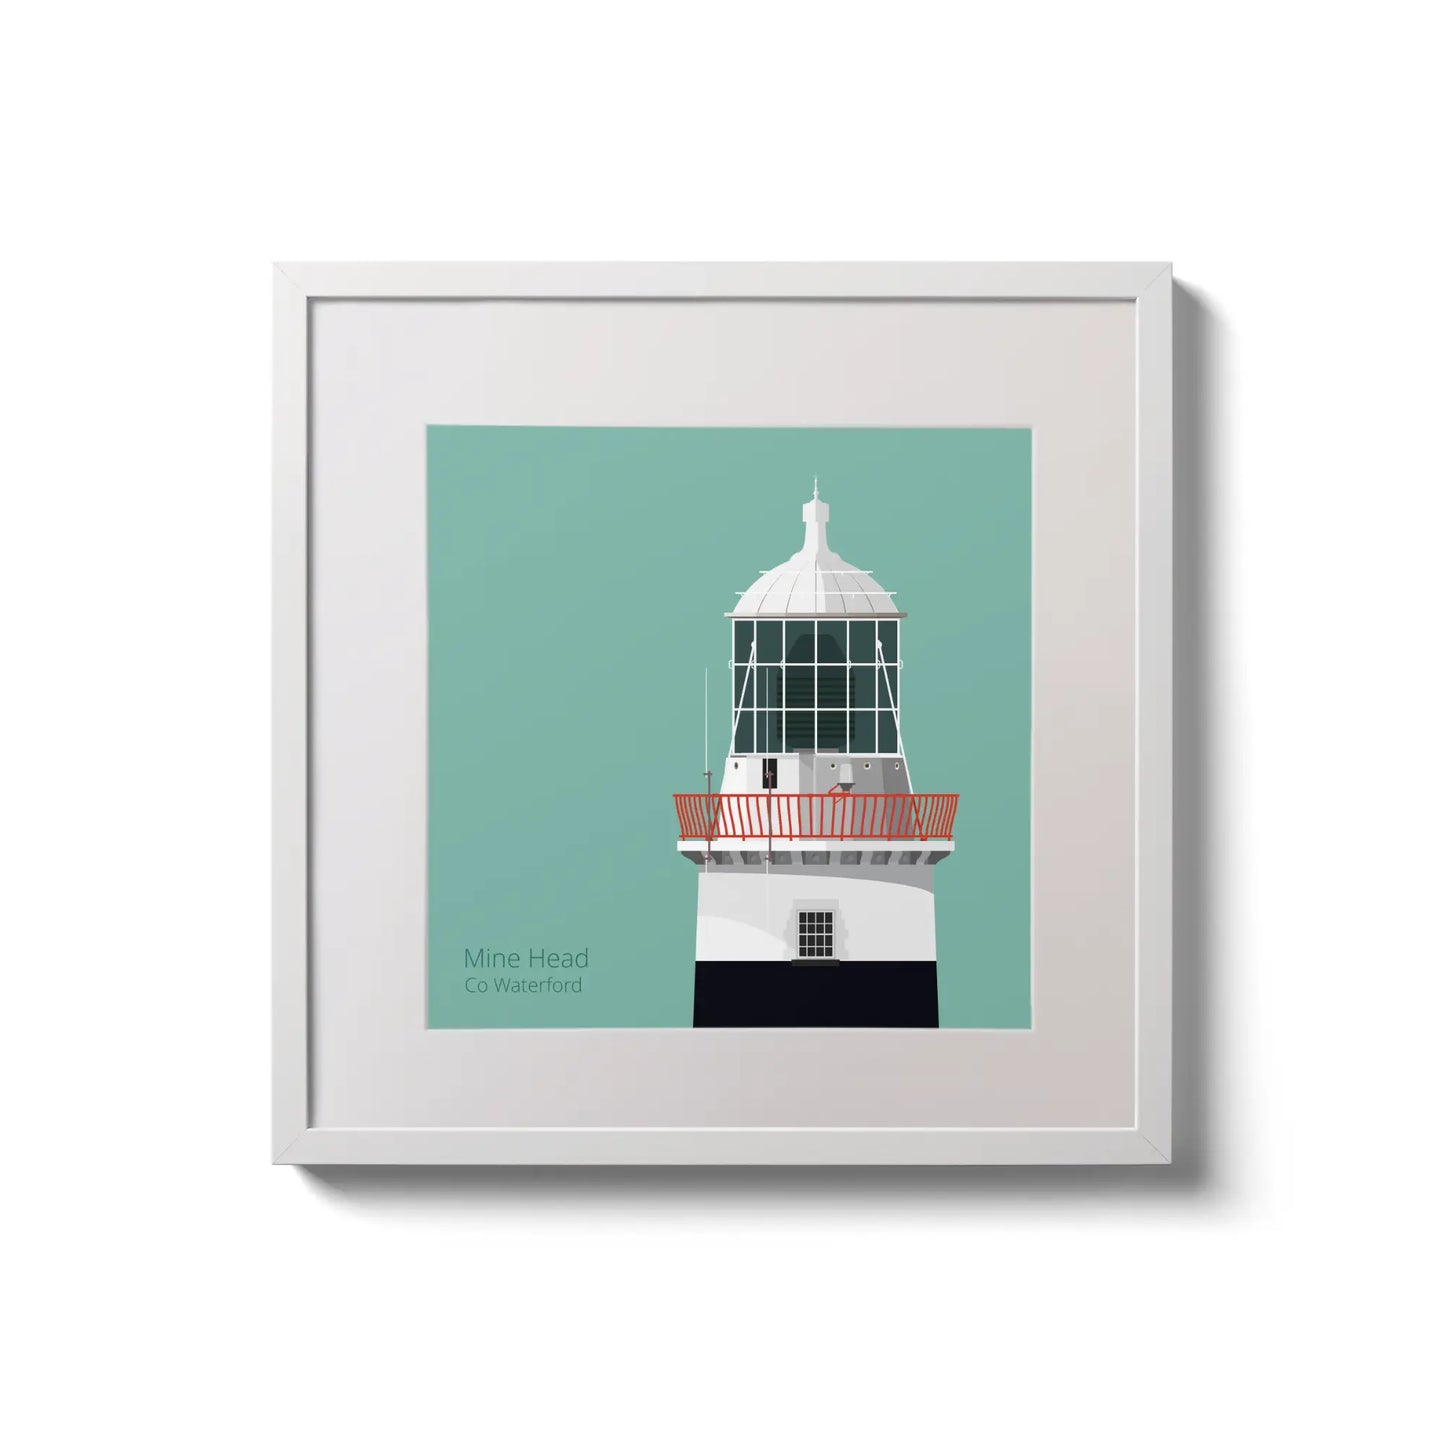 Illustration of Mine Head lighthouse on an ocean green background,  in a white square frame measuring 20x20cm.